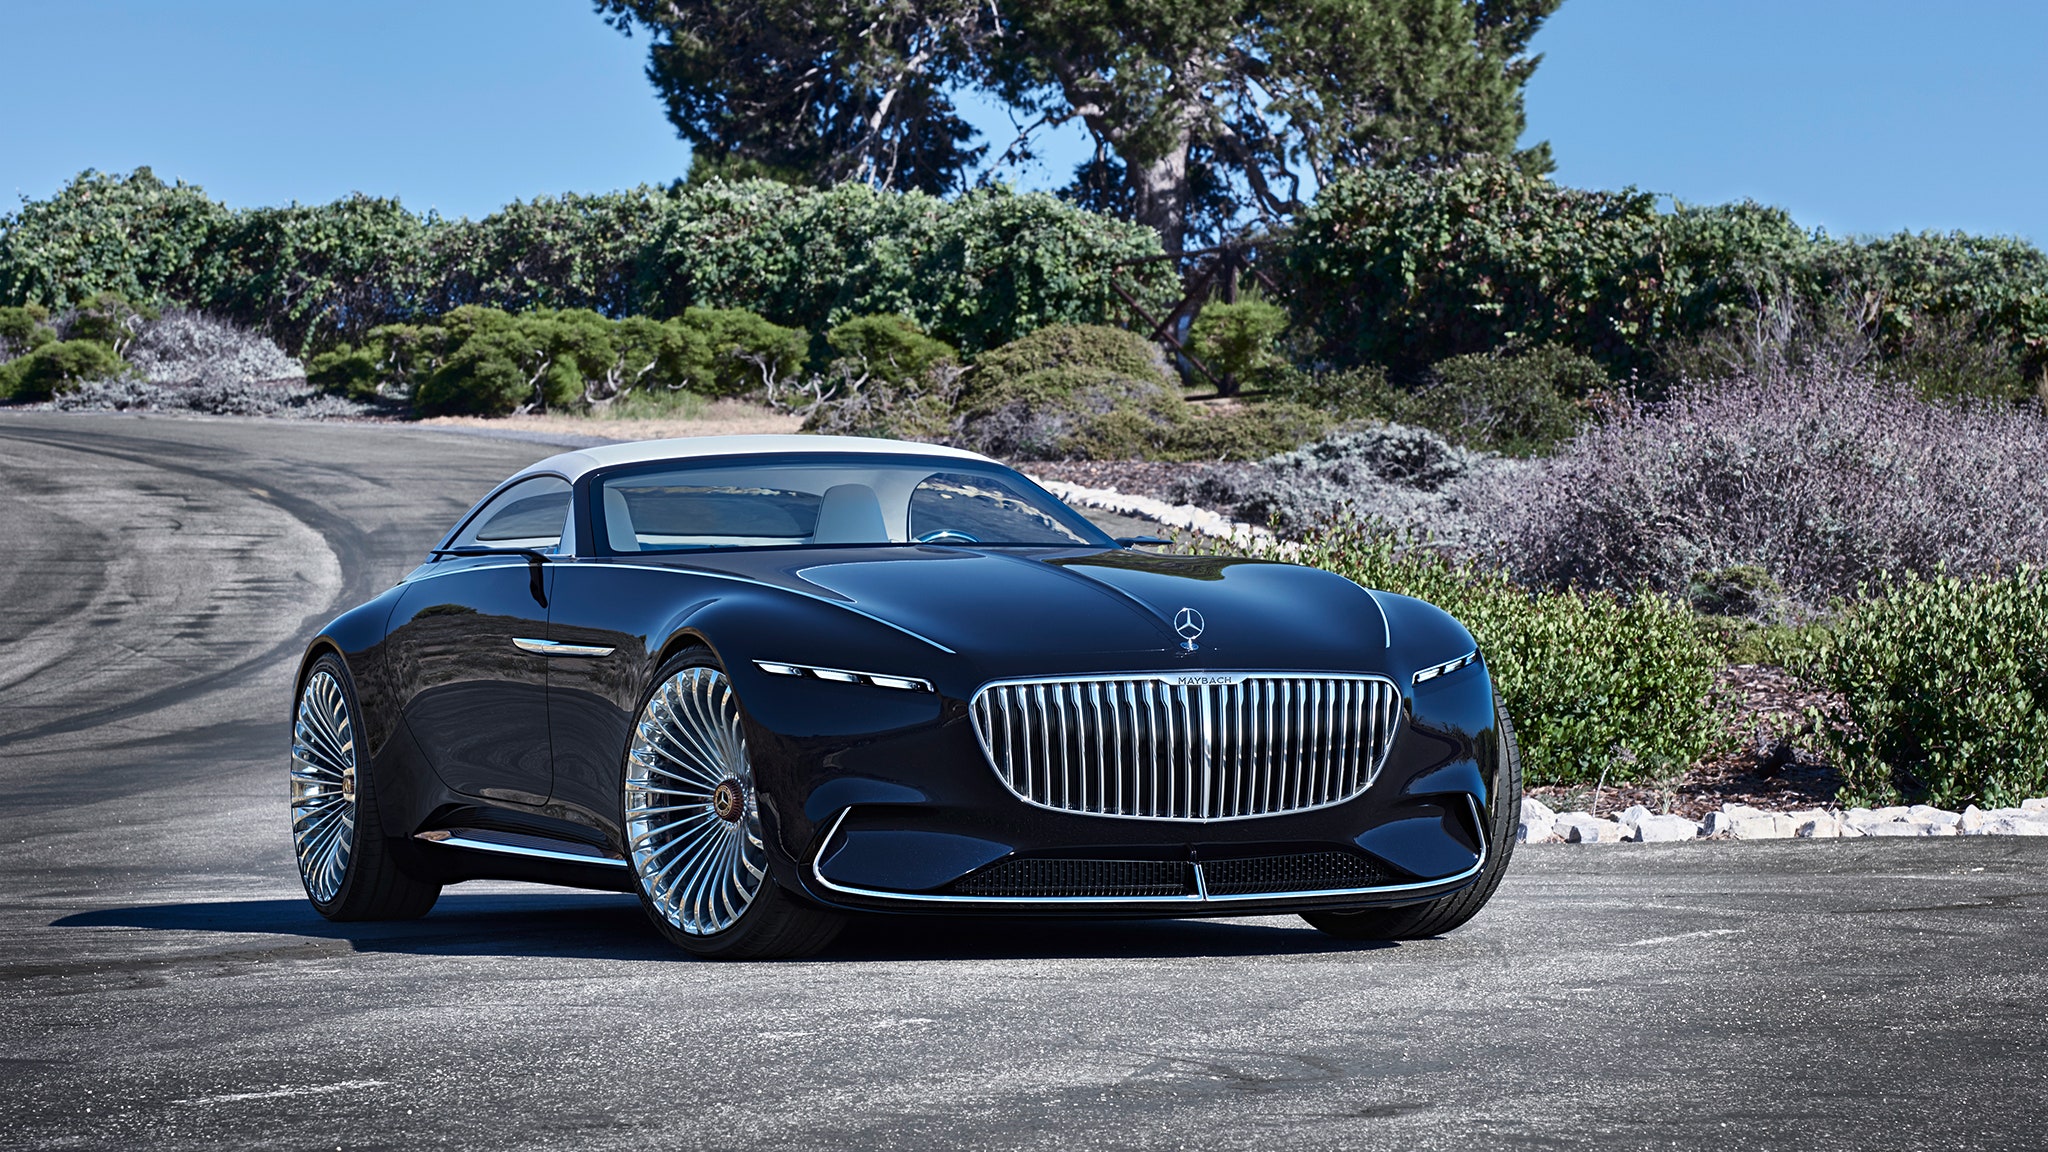 Mercedes Maybach 6 Cabriolet 2017 Wallpapers